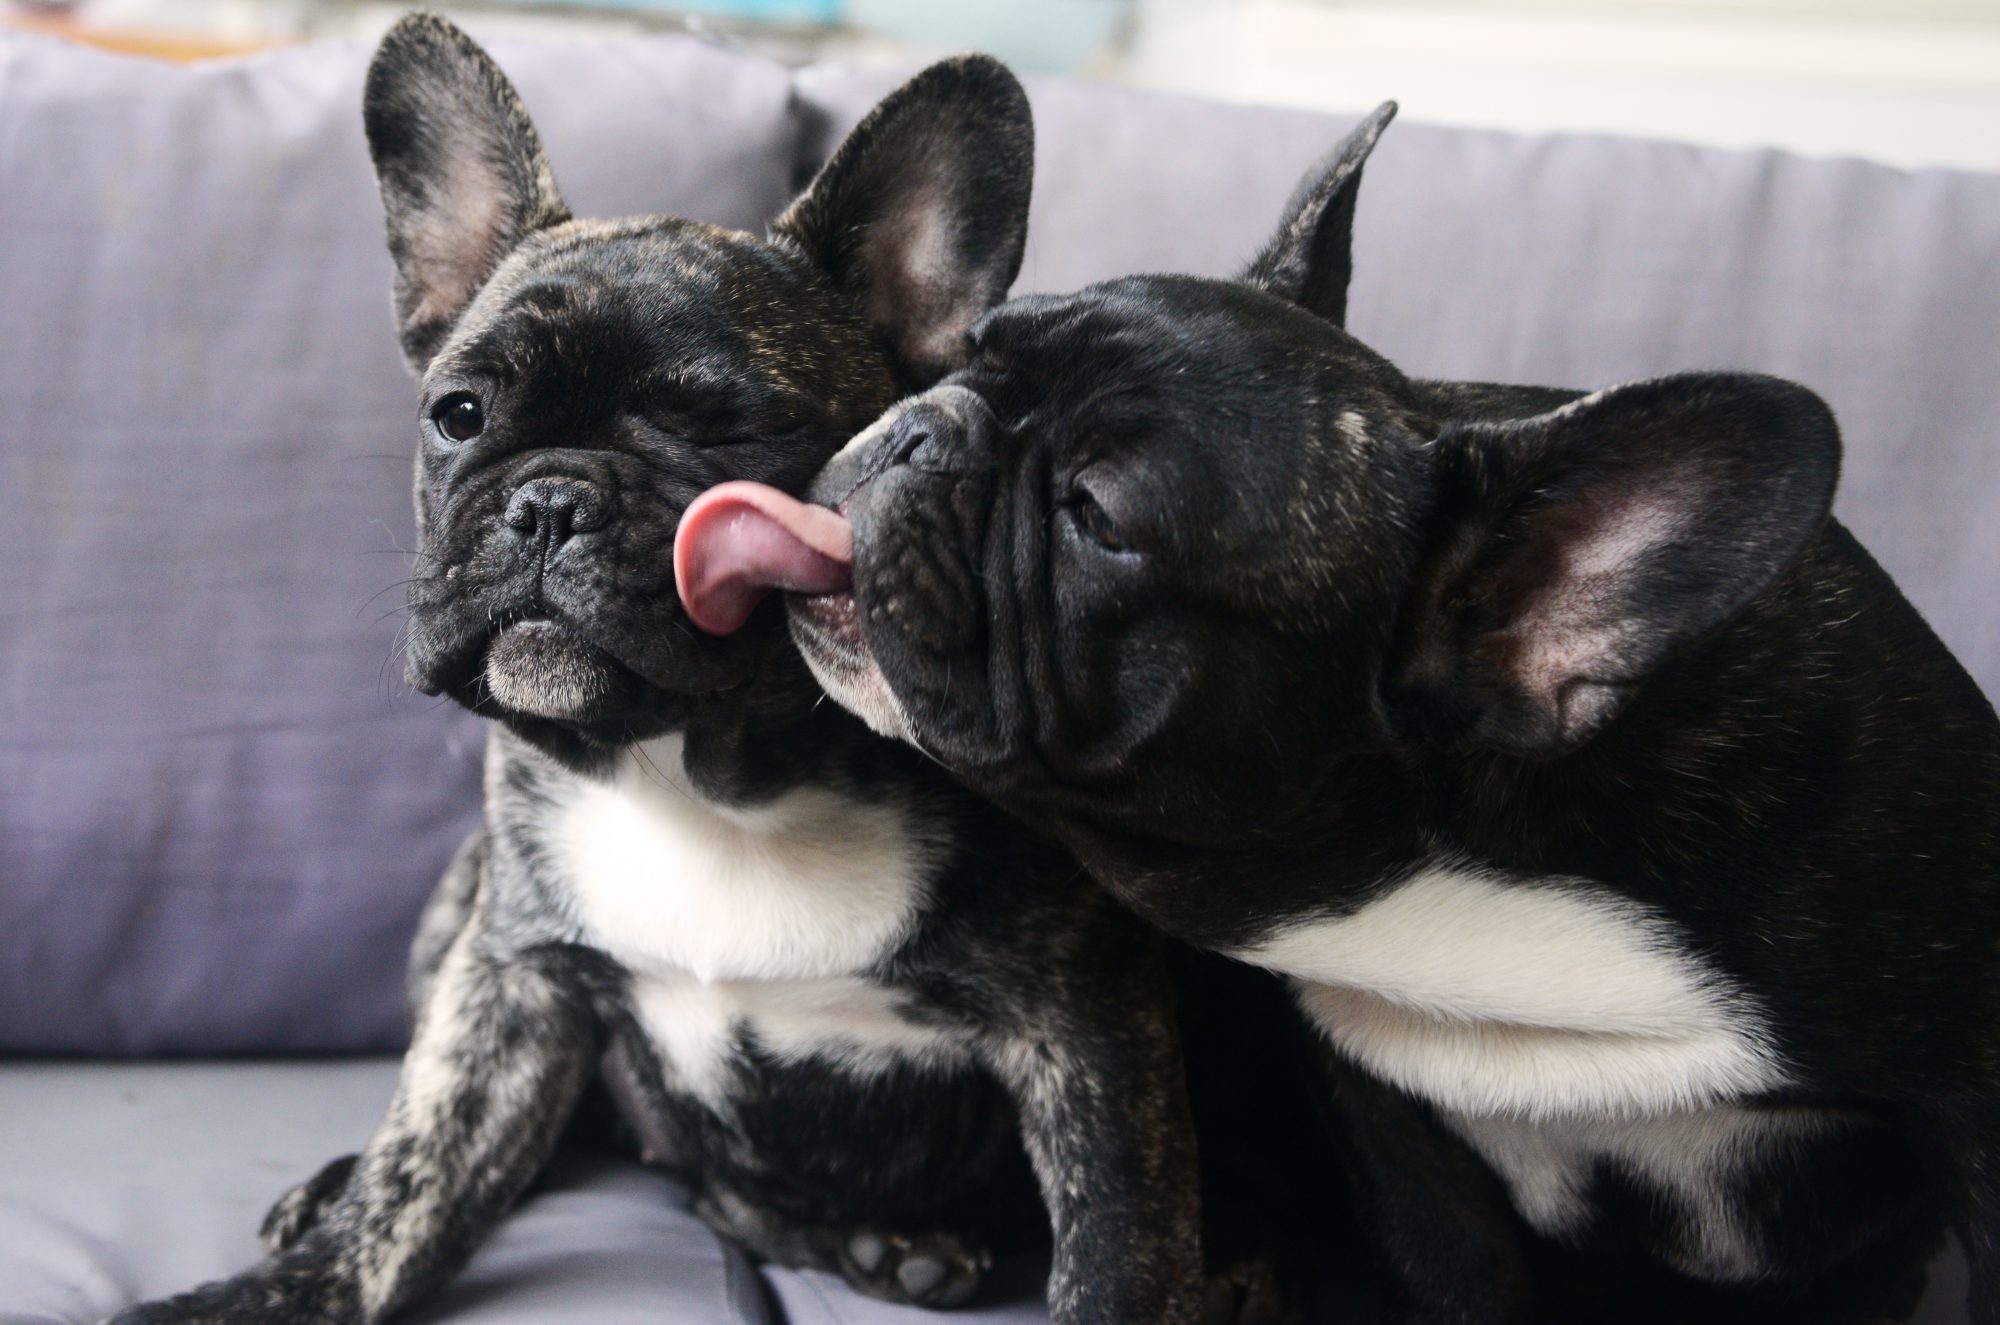 French Bulldog - All About Dogs